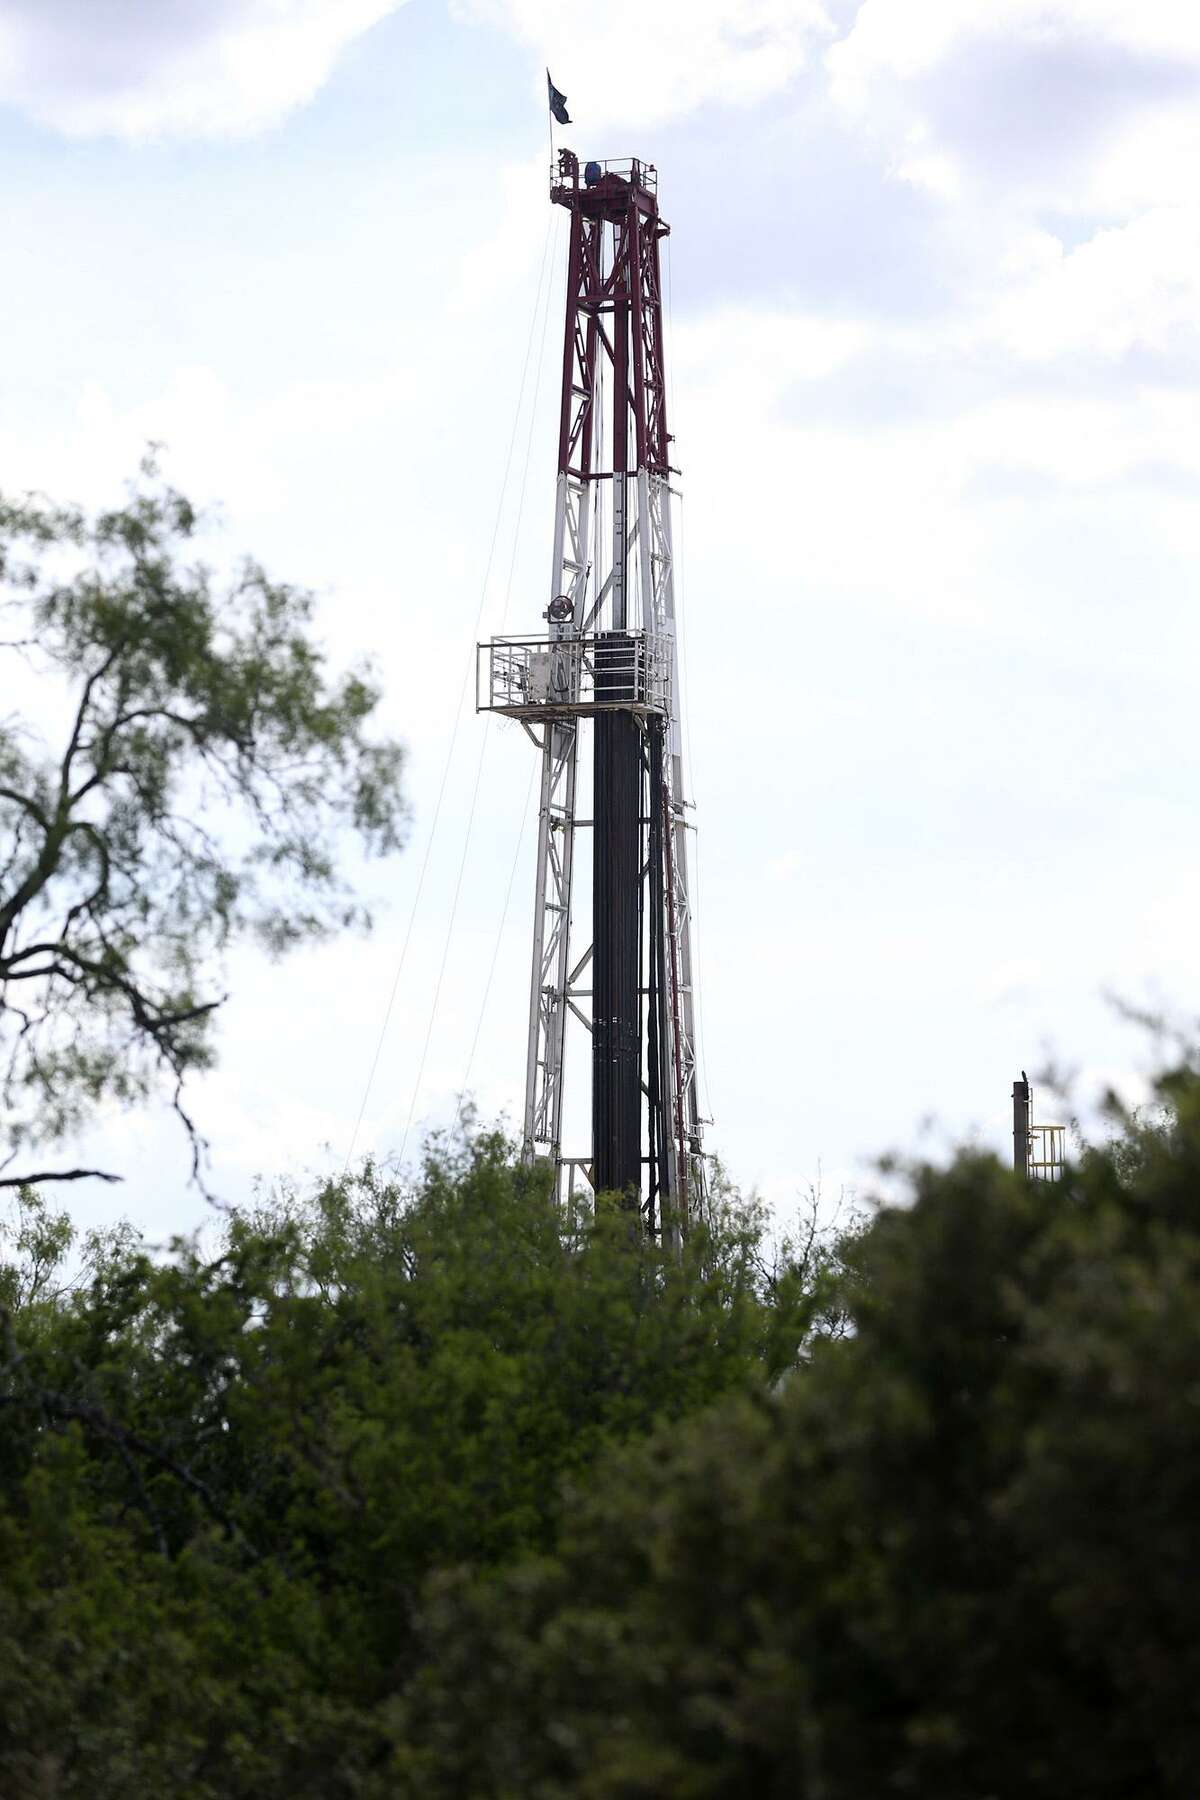 In a deal with Pemex, San Antonio-based Lewis Energy State would invest up $617 million to develop the Olmos field in Coahuila, an extension of Eagle Ford Shale, where this well is located.